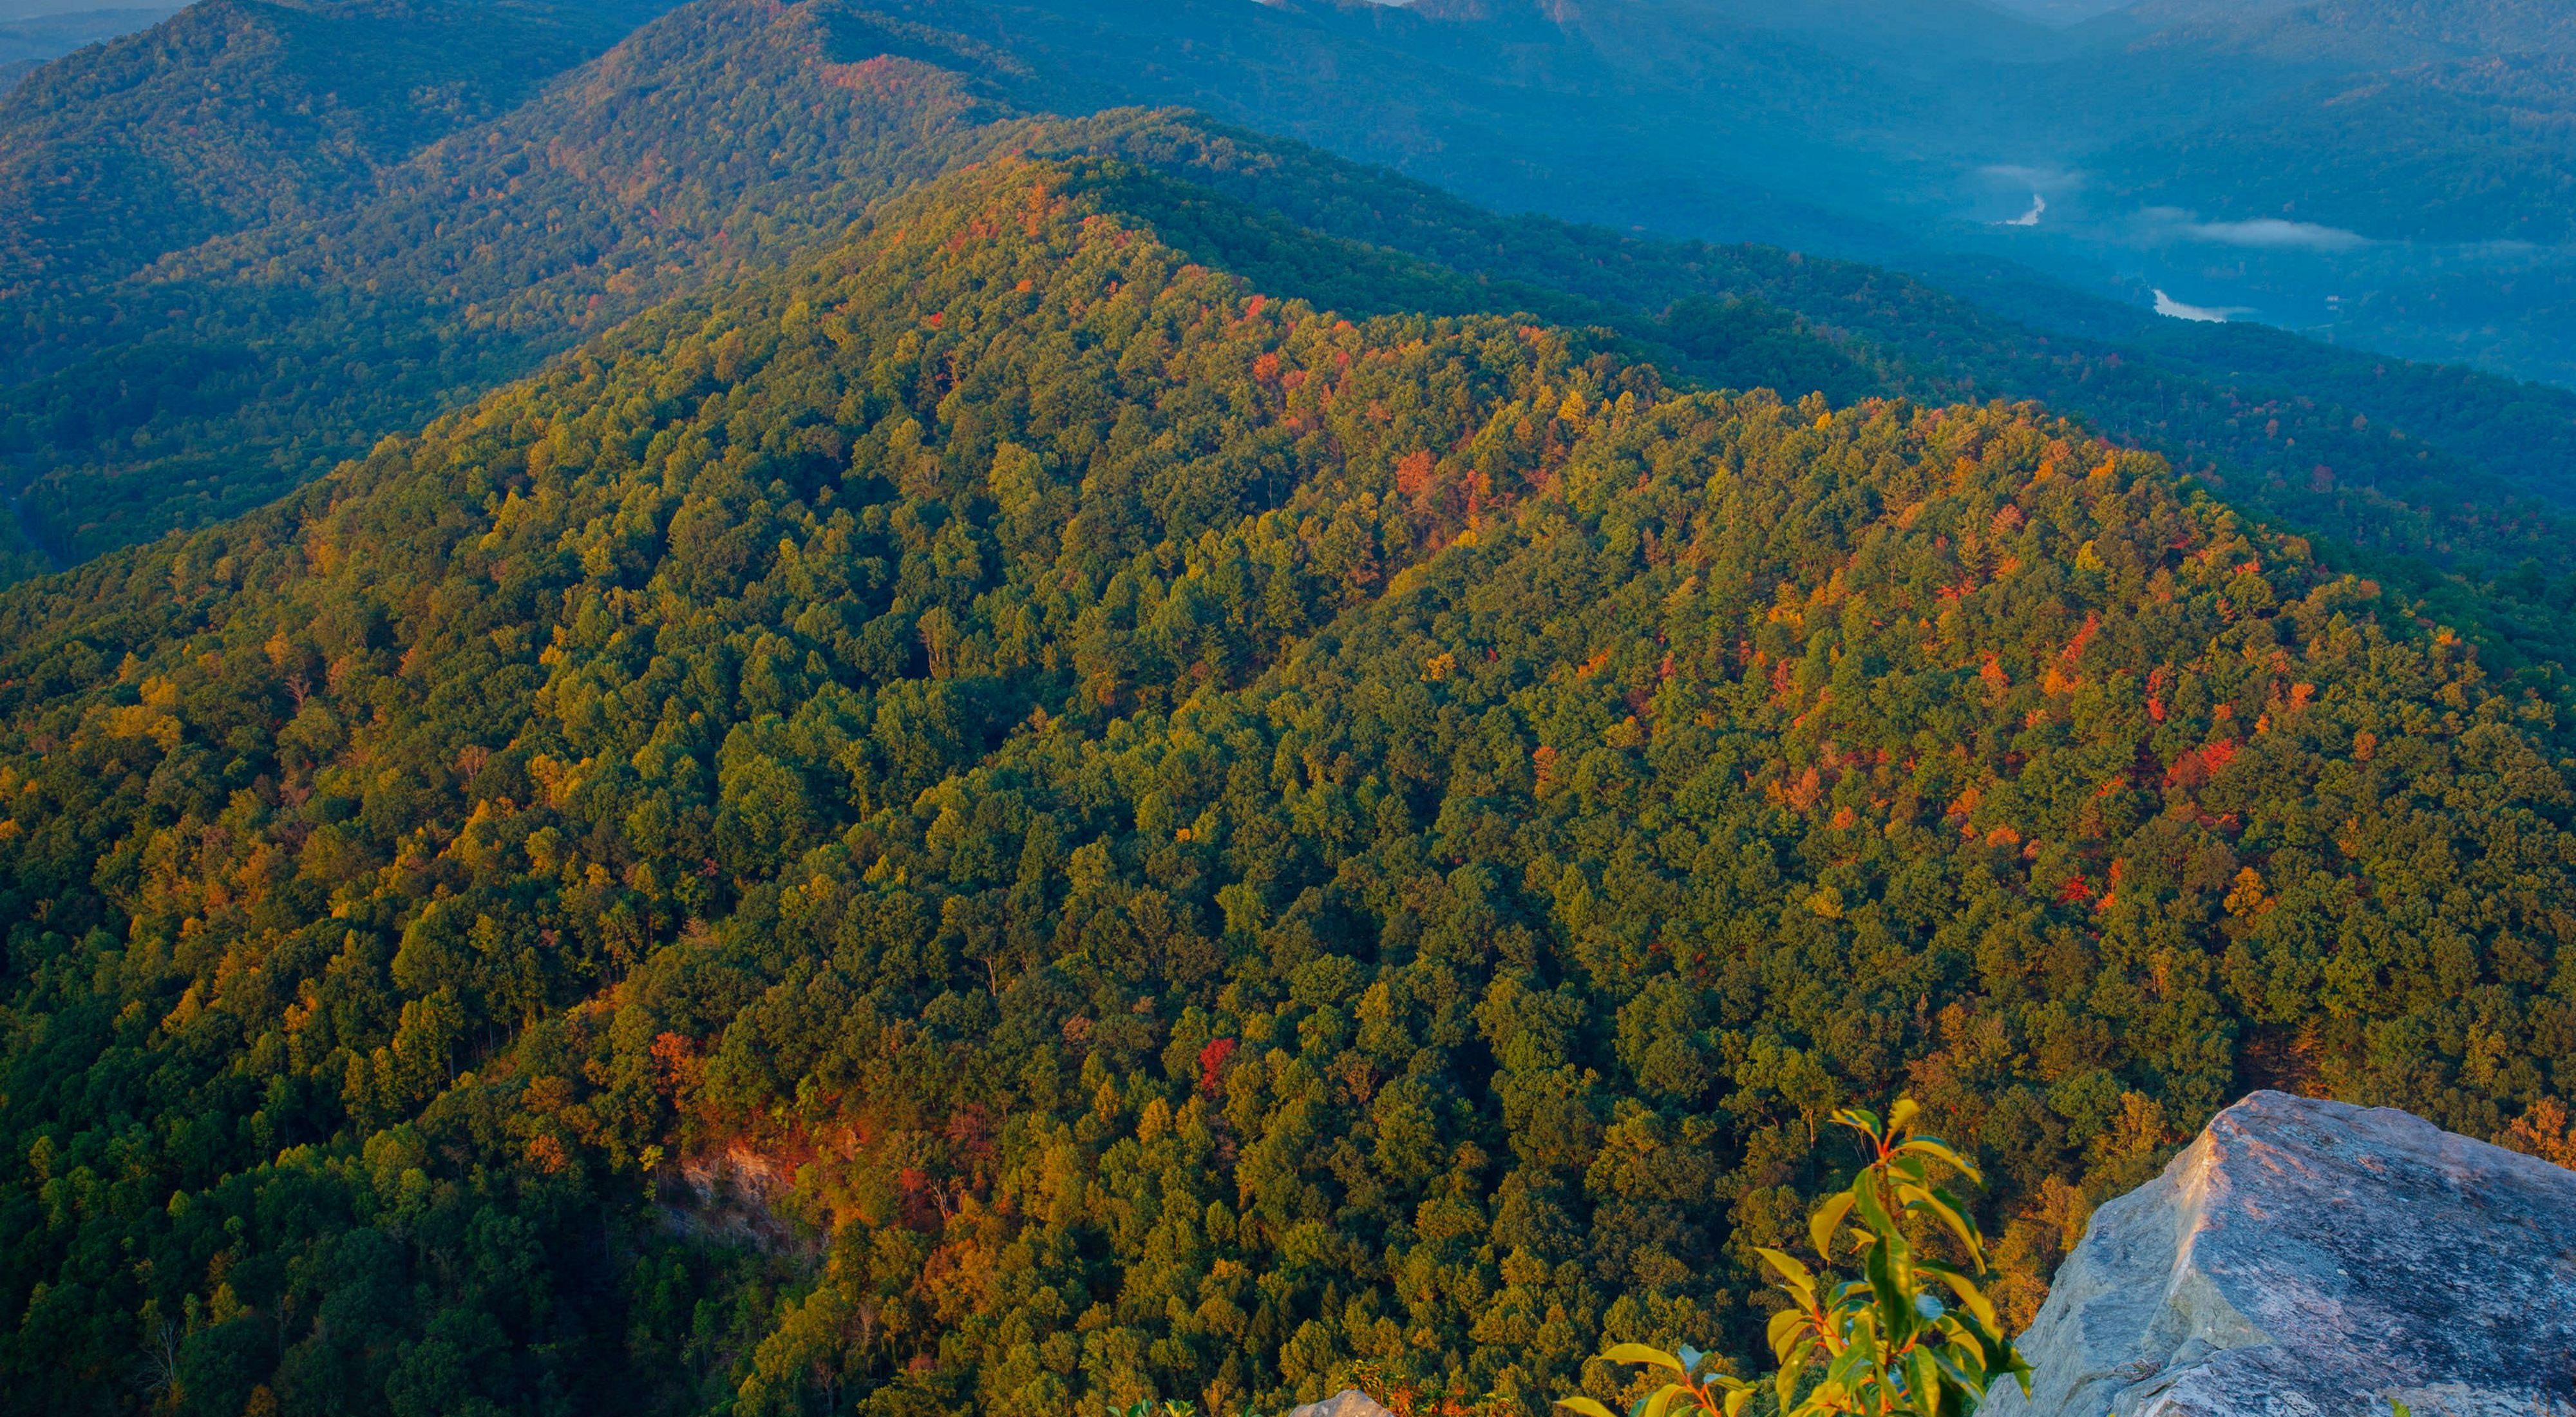 Aerial view of a steep moutain ridge that stretches to the horizon. The mountains are covered in green forests with patches of orange from fall foliage beginning to change color.